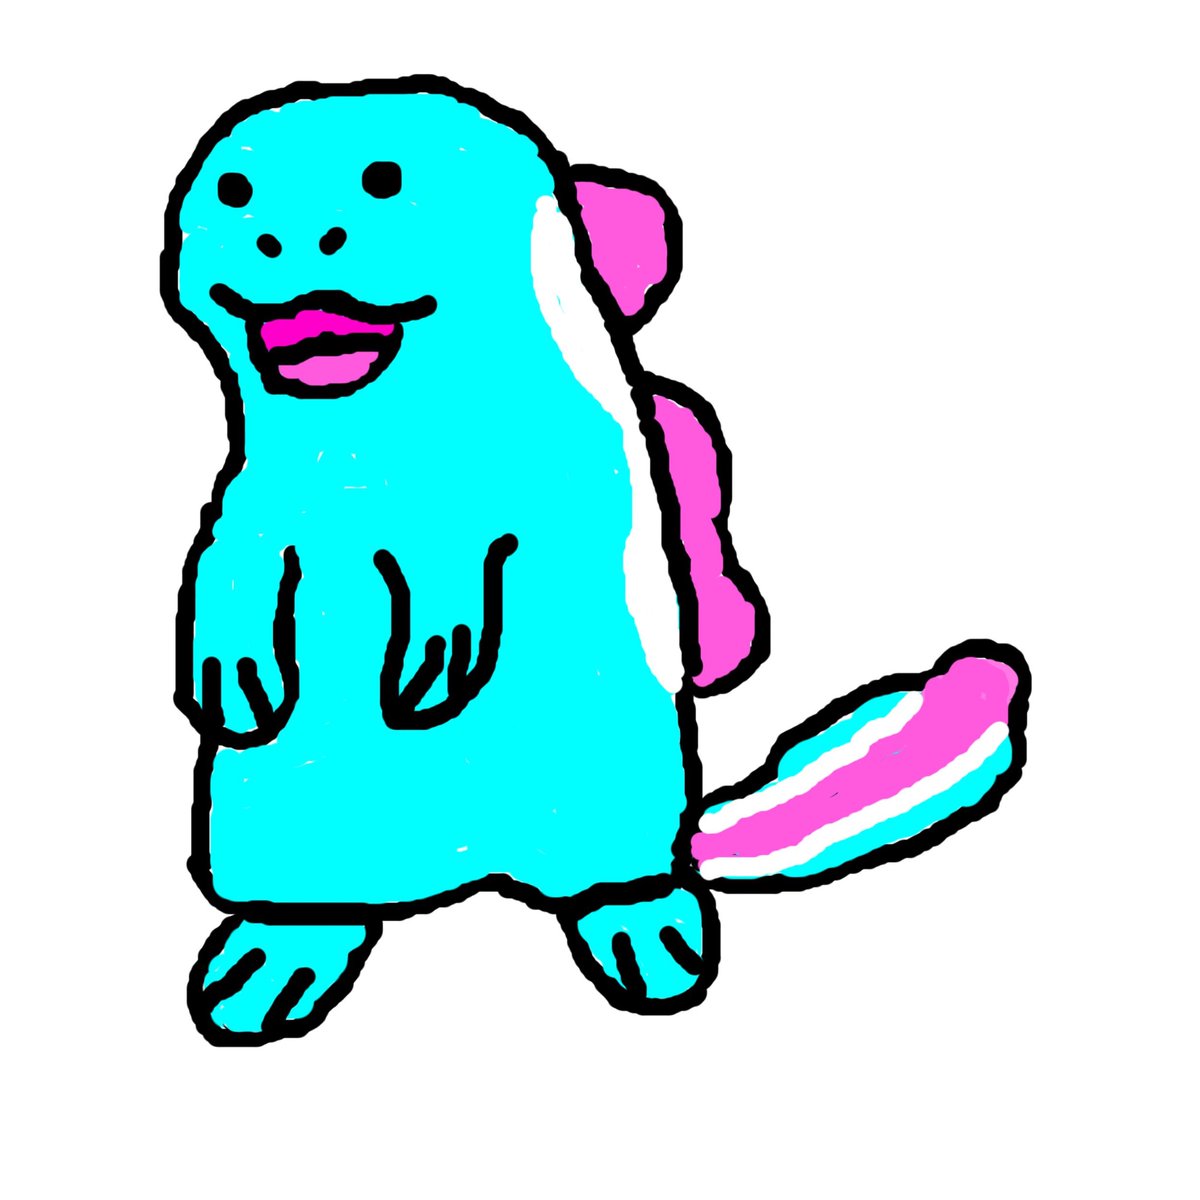 Again, Happy Pride Month!!!!!!!
This time,
I just wanted to wish a happy pride for my trans friends. I am proud of all of you. <3
Here is a quagsire for trans pride.